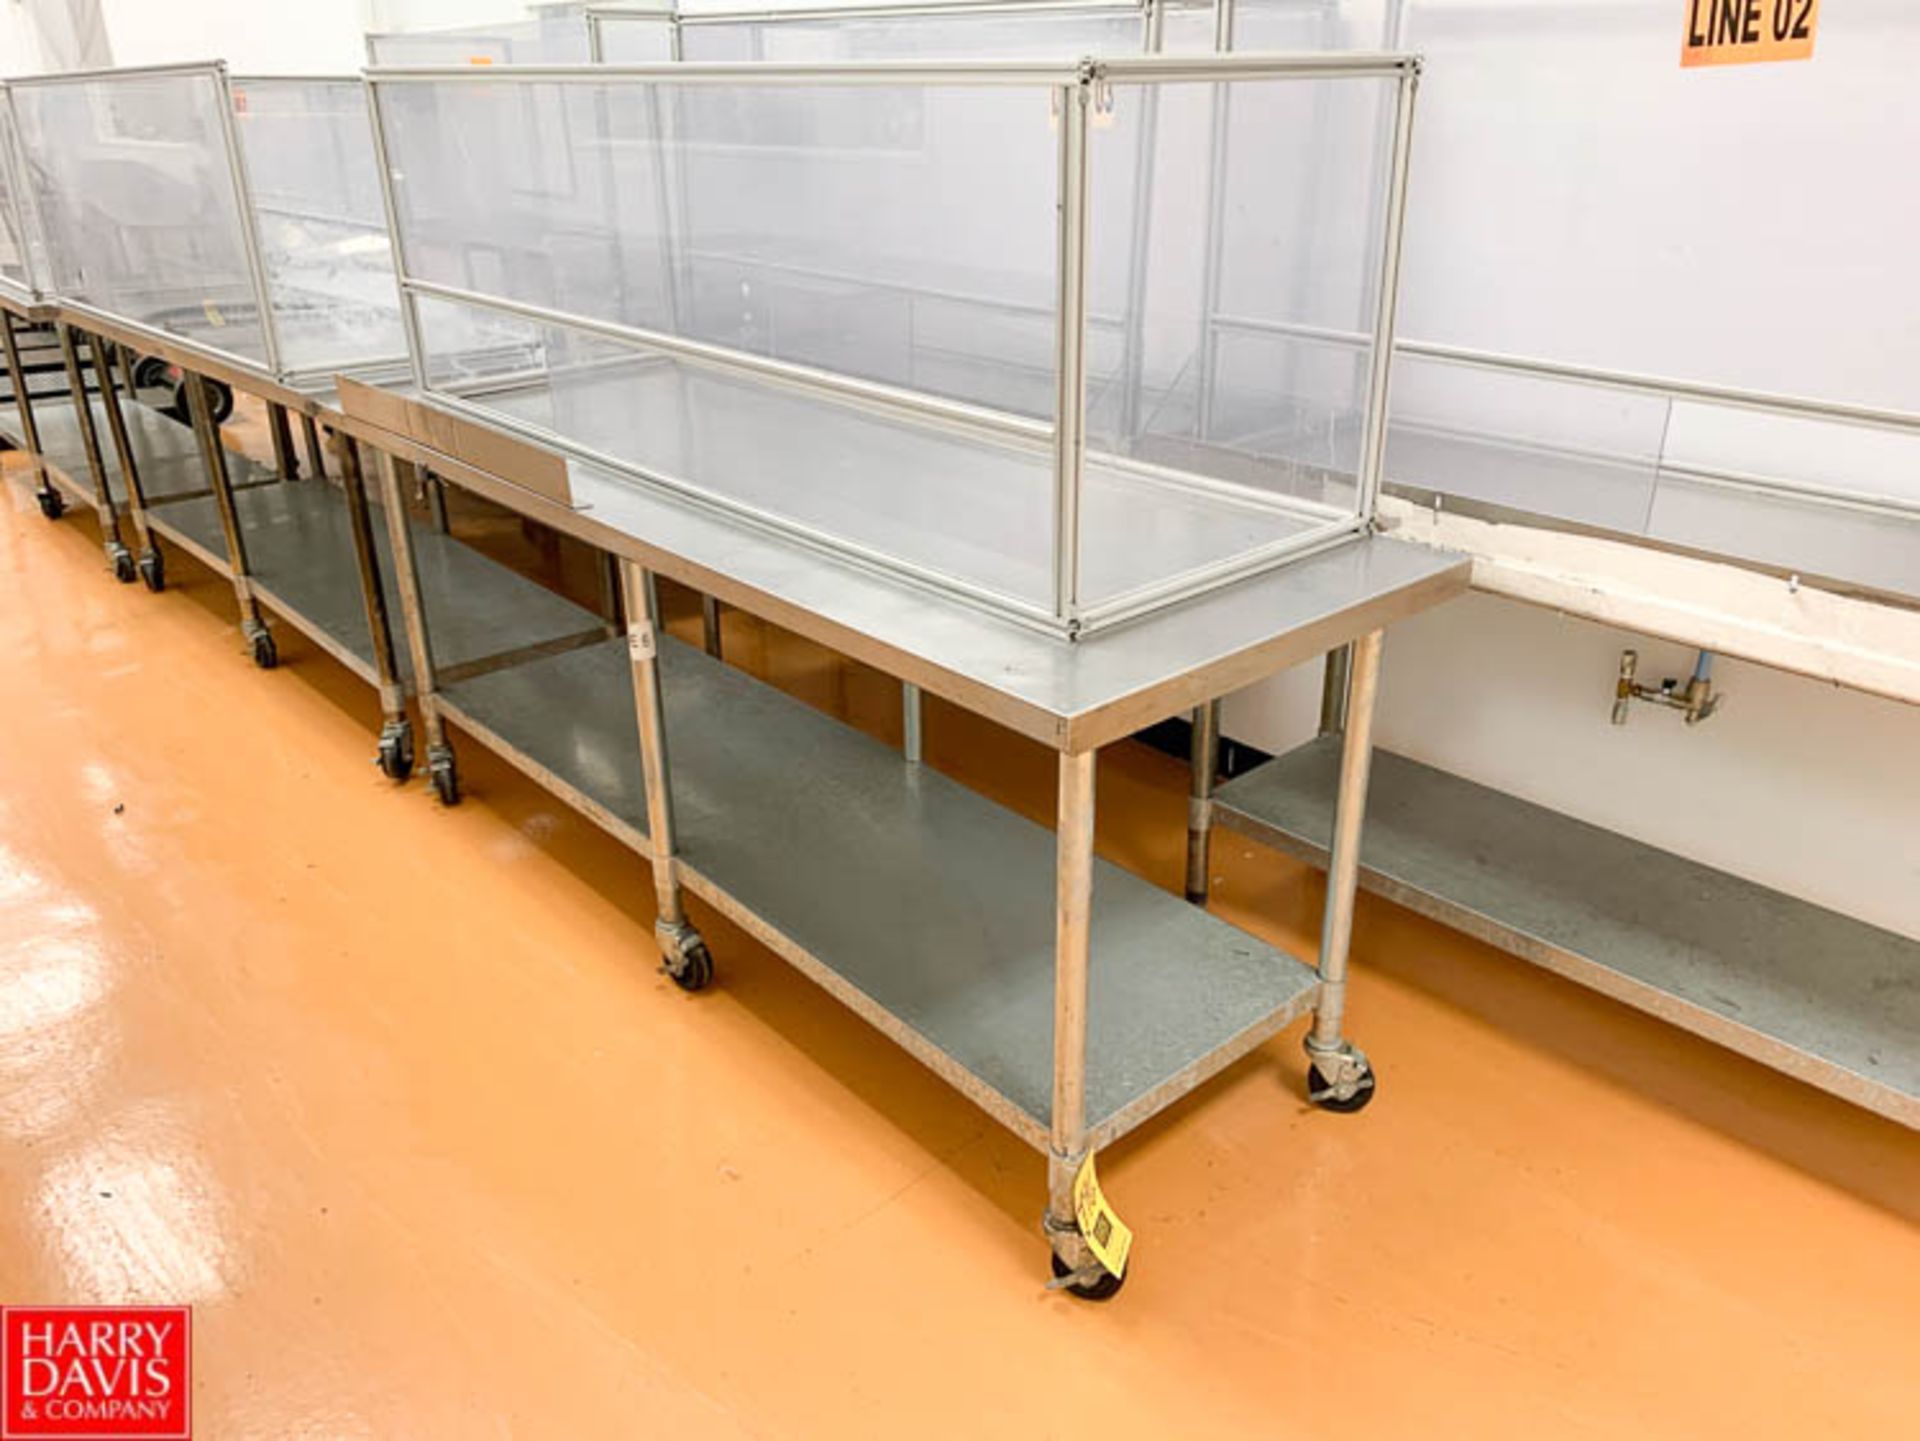 Portable S/S Tables, Up to 30" x 84" Rigging Prices: 175